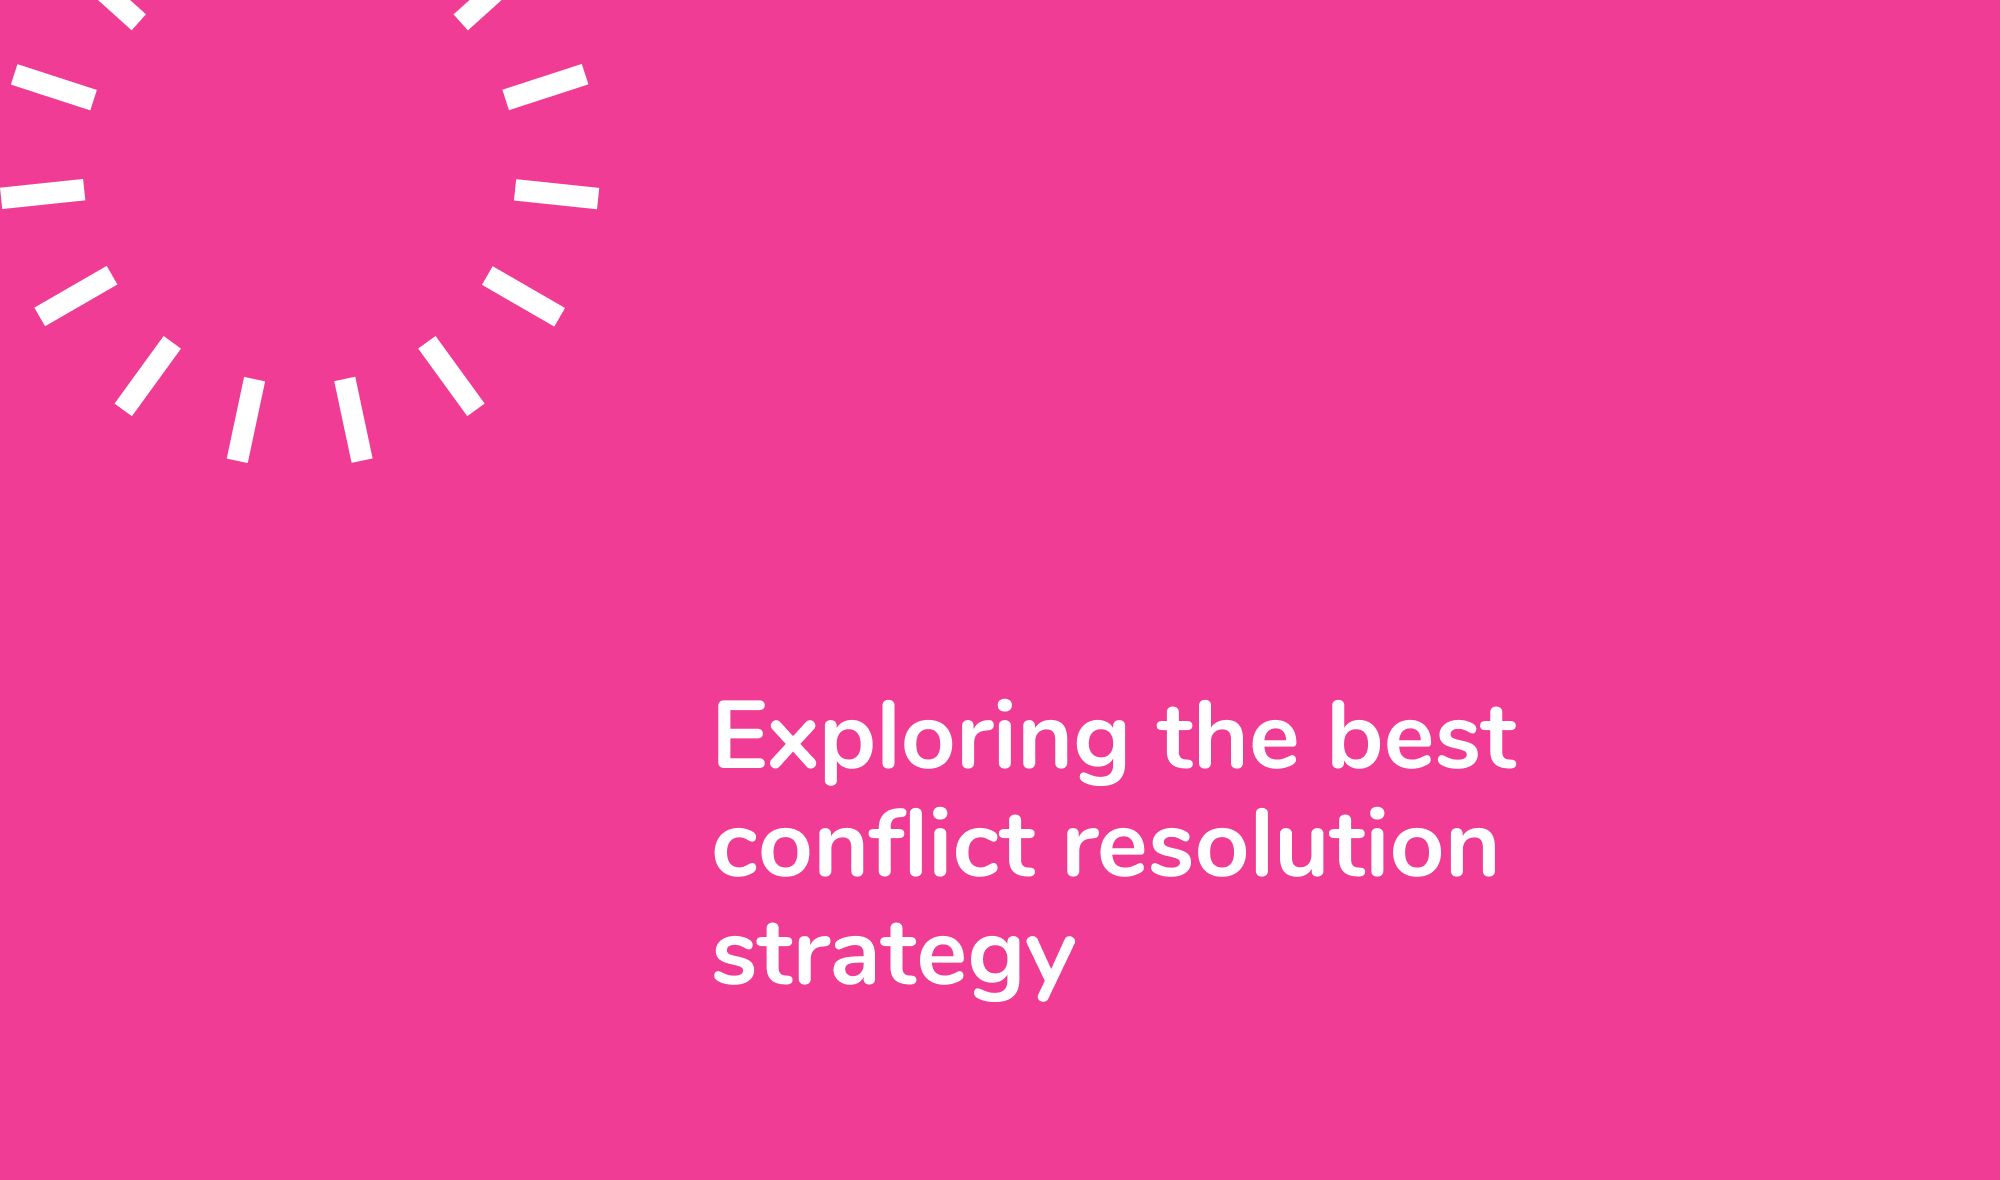 Exploring the best conflict resolution strategy